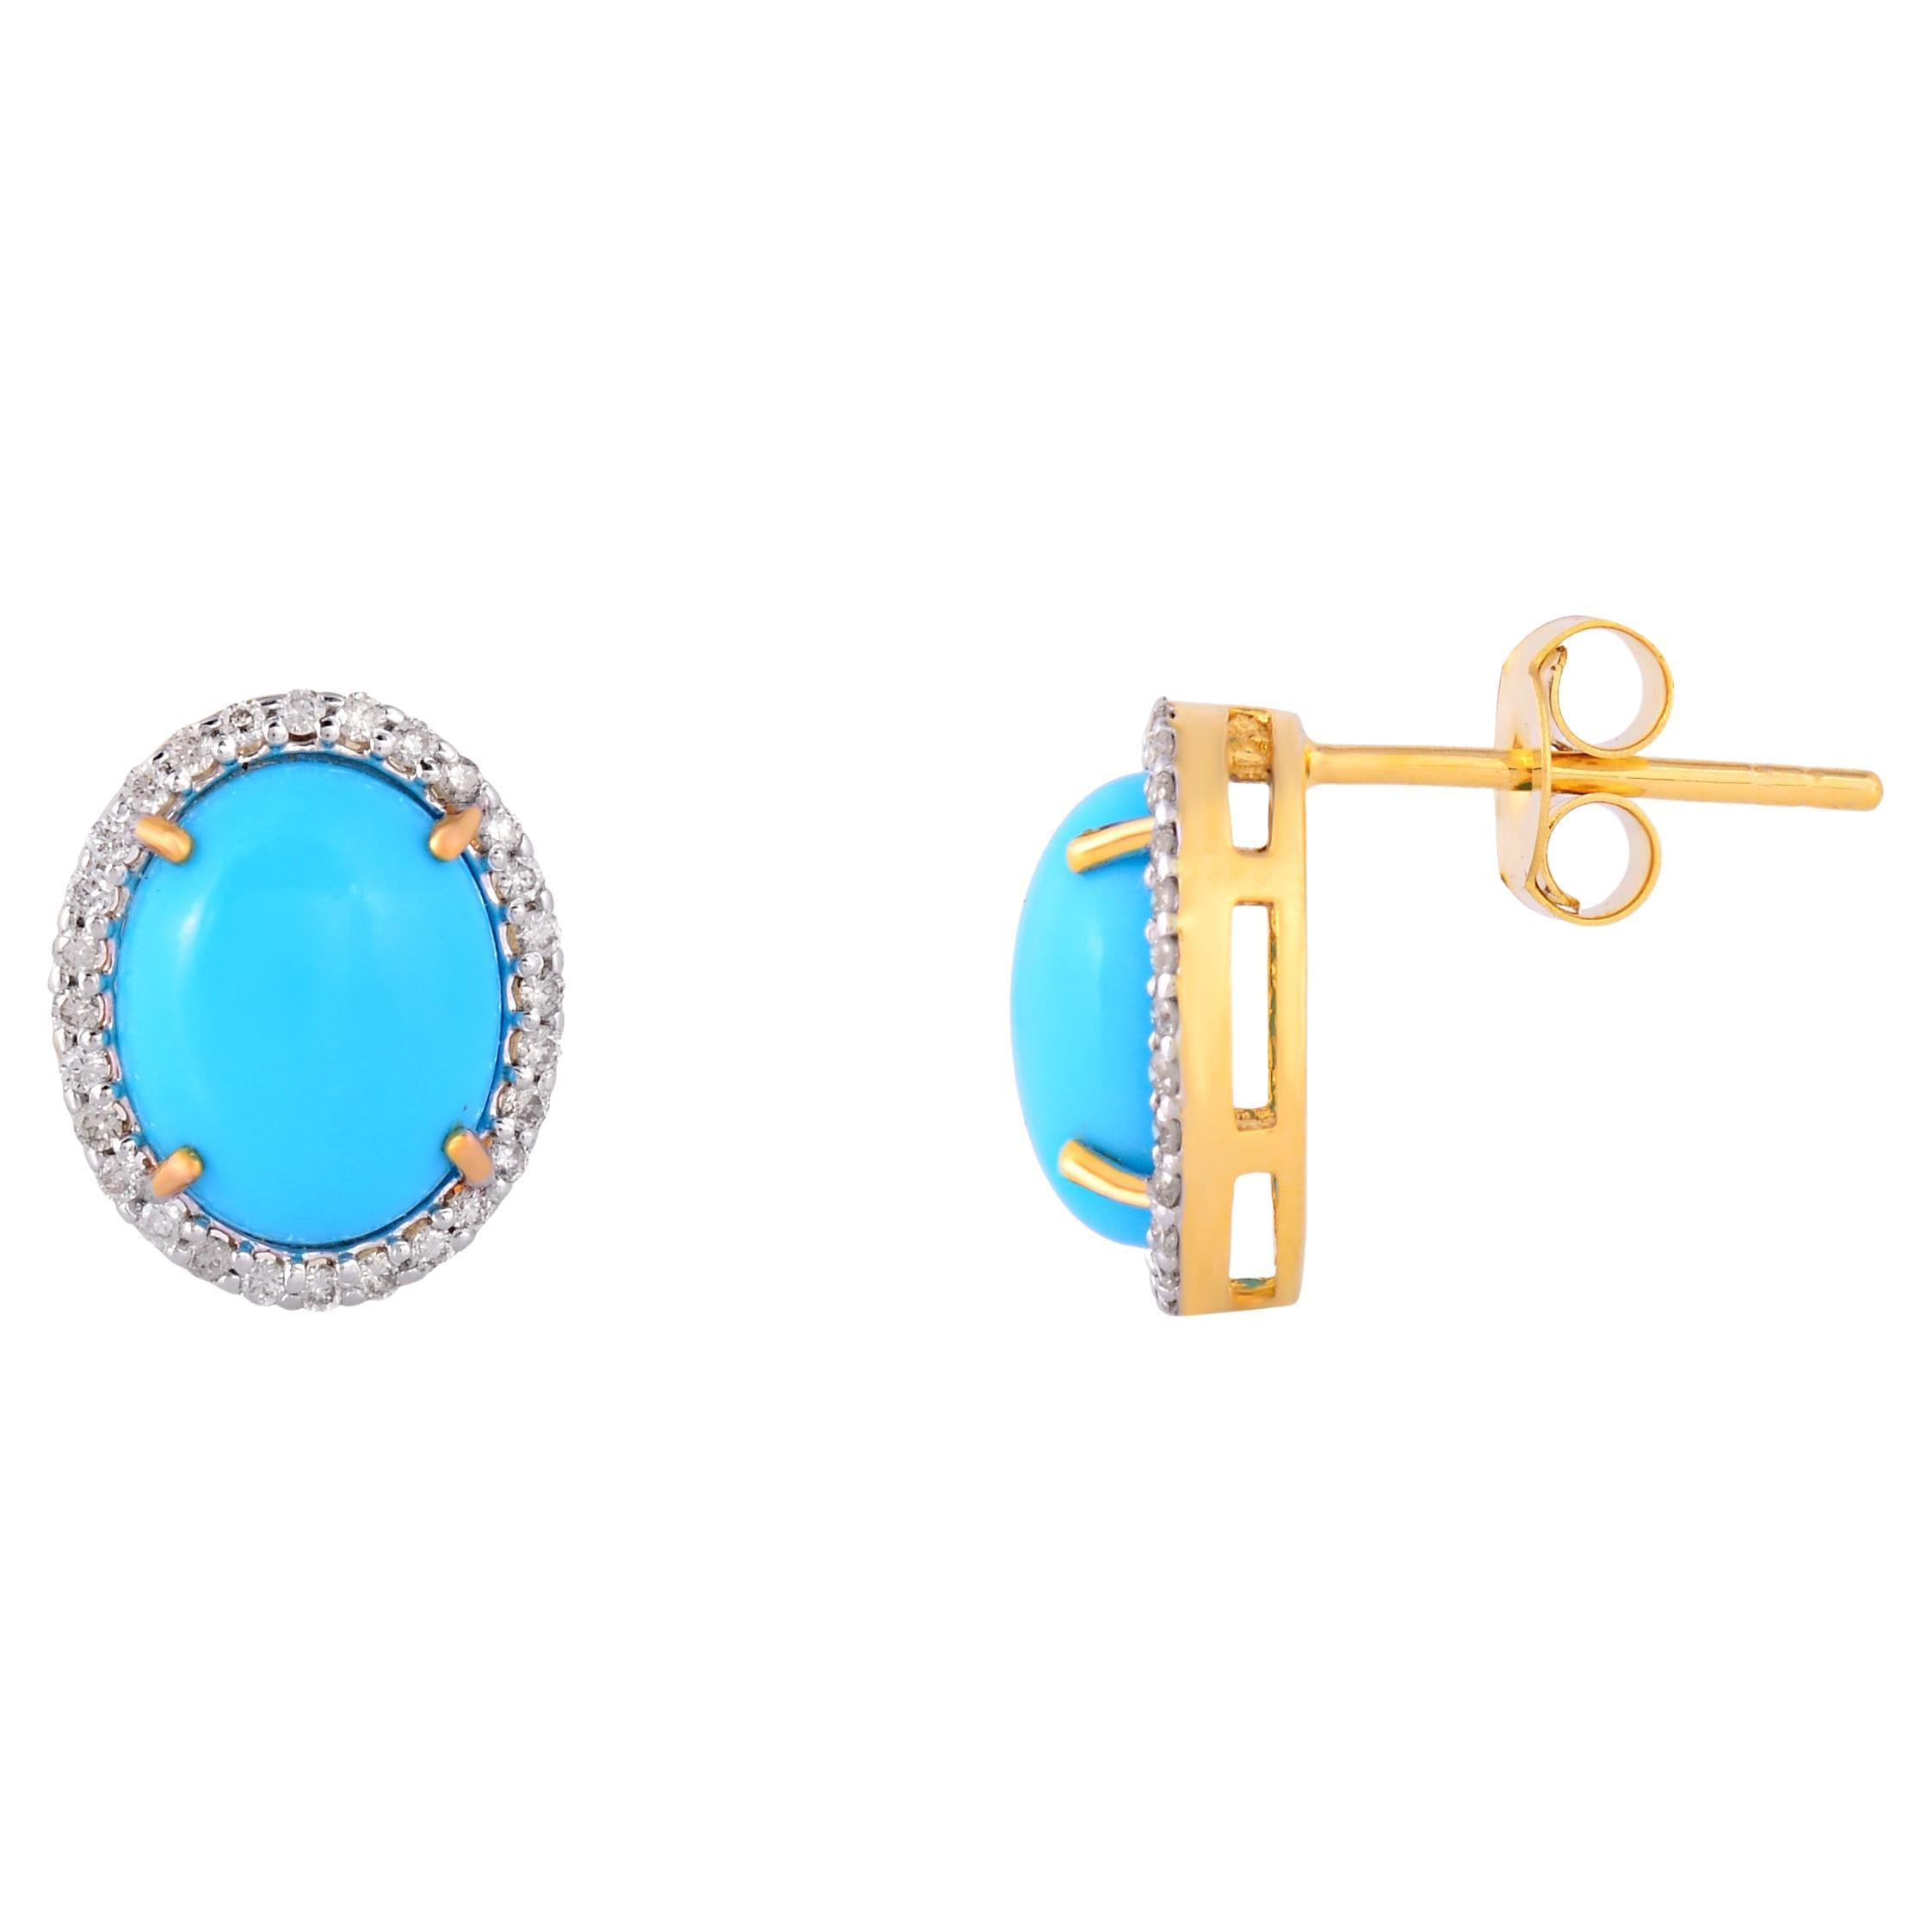 Turquoise Stud Earrings with Diamond in 14k Gold For Sale